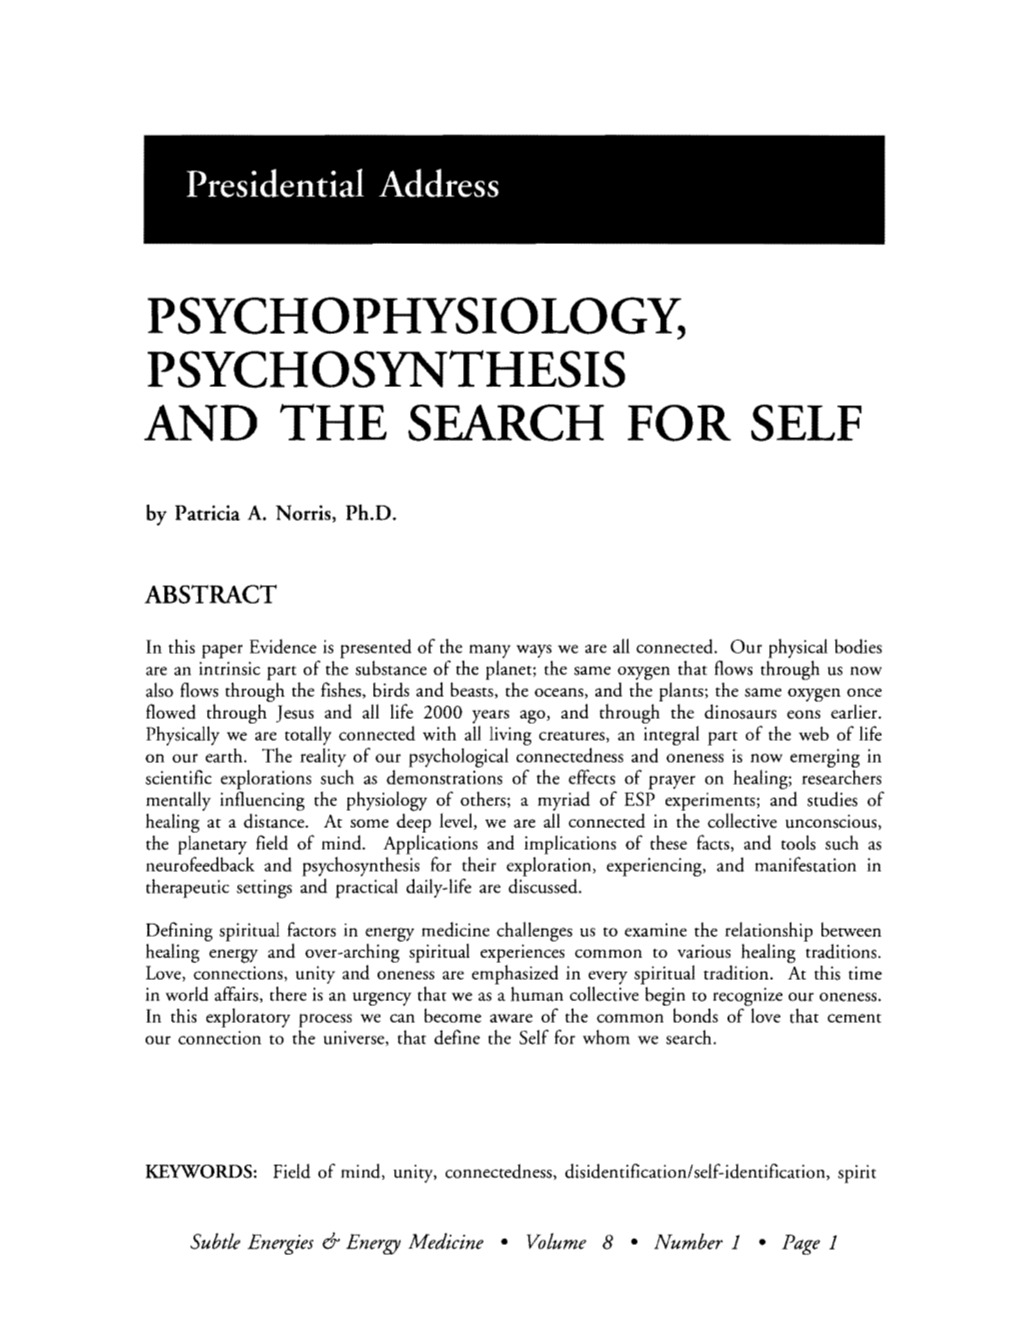 PSYCHOSYNTHESIS and the SEARCH for SELF by Patricia A